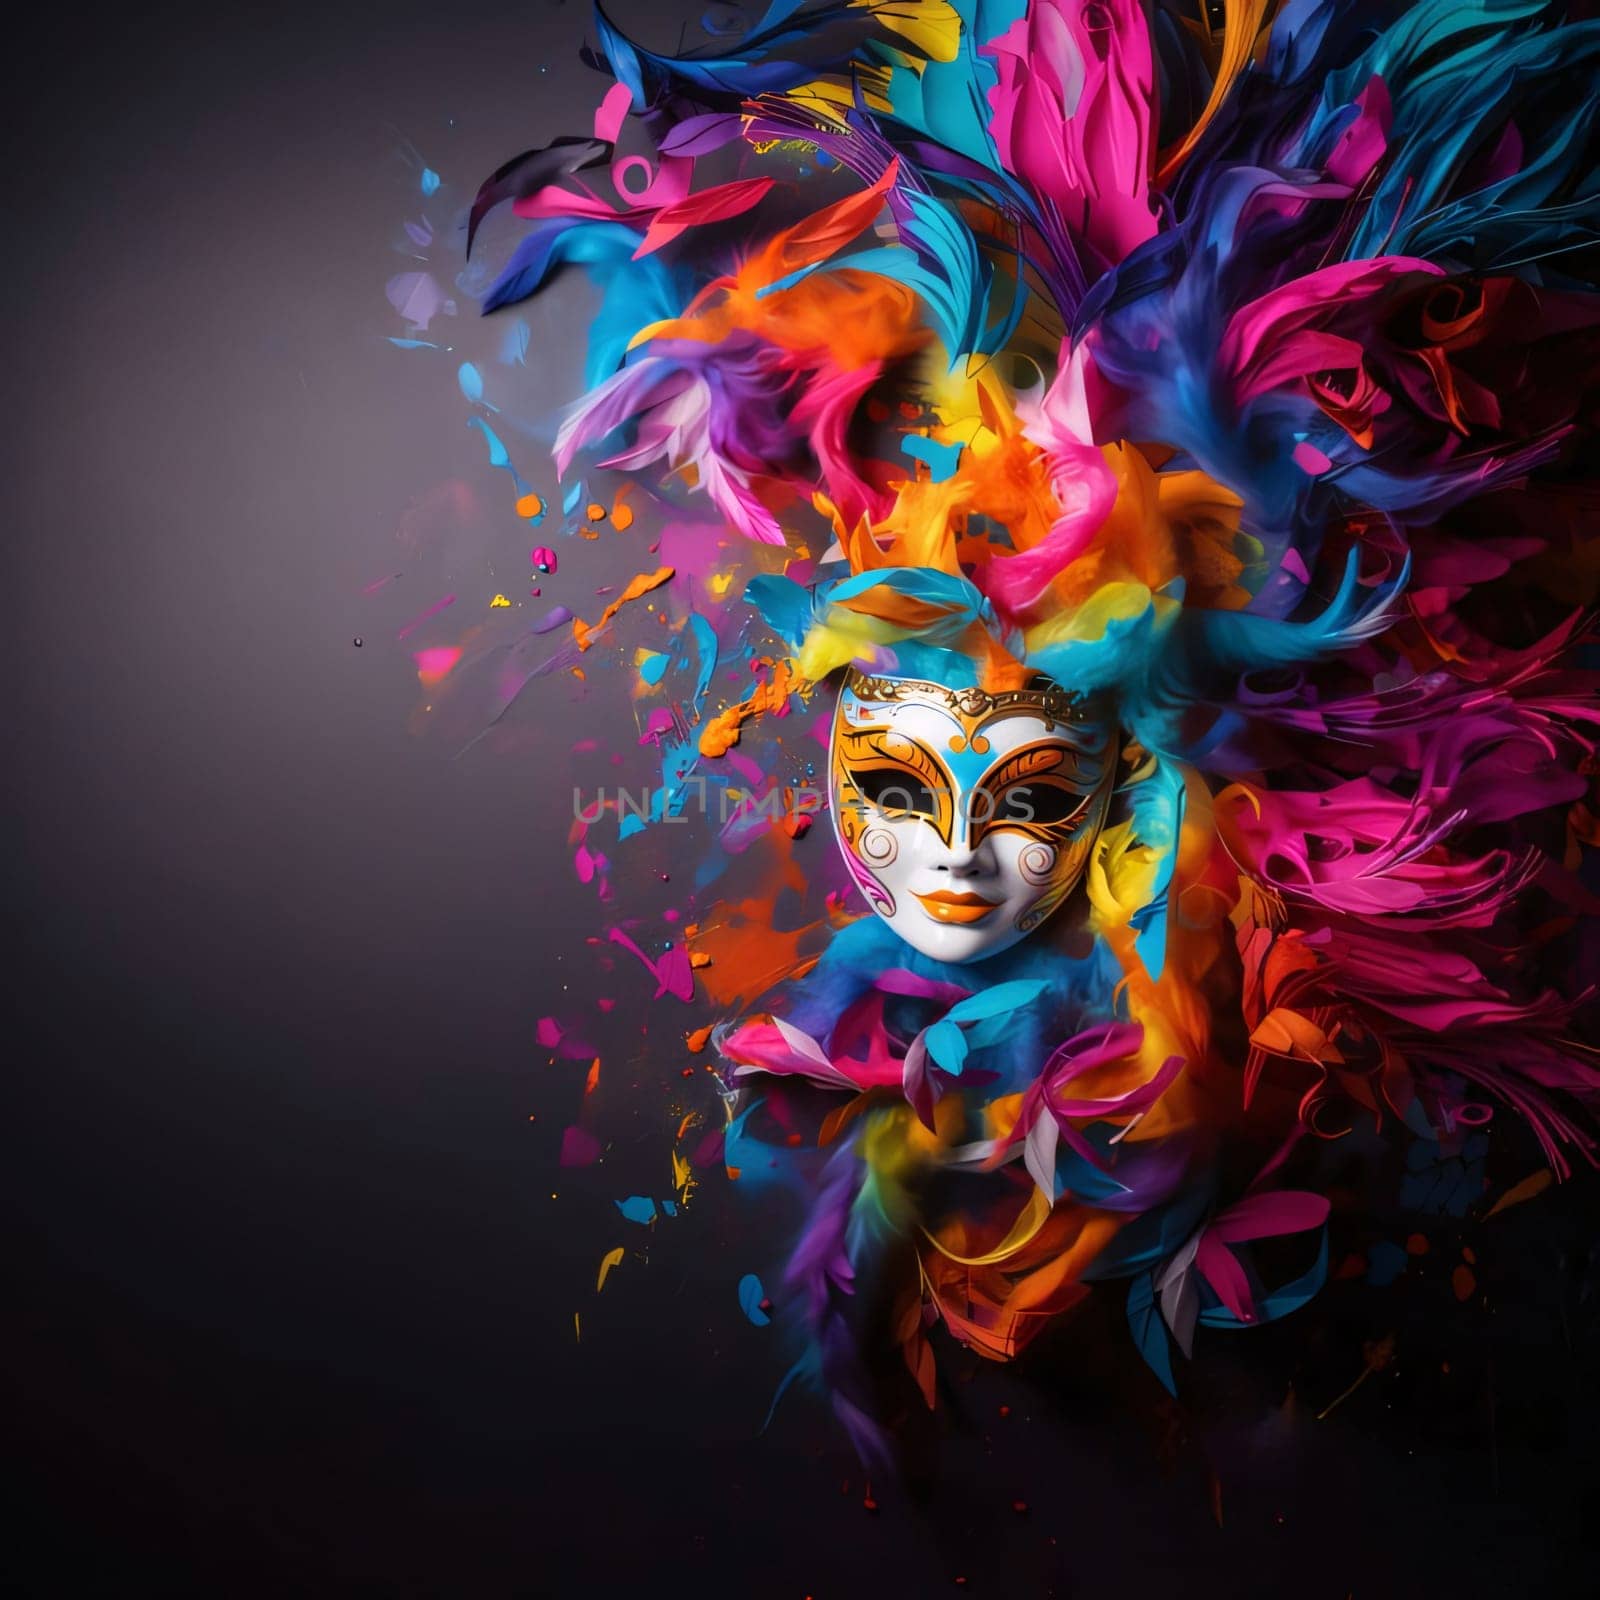 Carnival mask decorated with colorful rainbow ornaments, feathers on a dark background, to about space for your own content. Carnival outfits, masks and decorations. A time of fun and celebration before the fast.